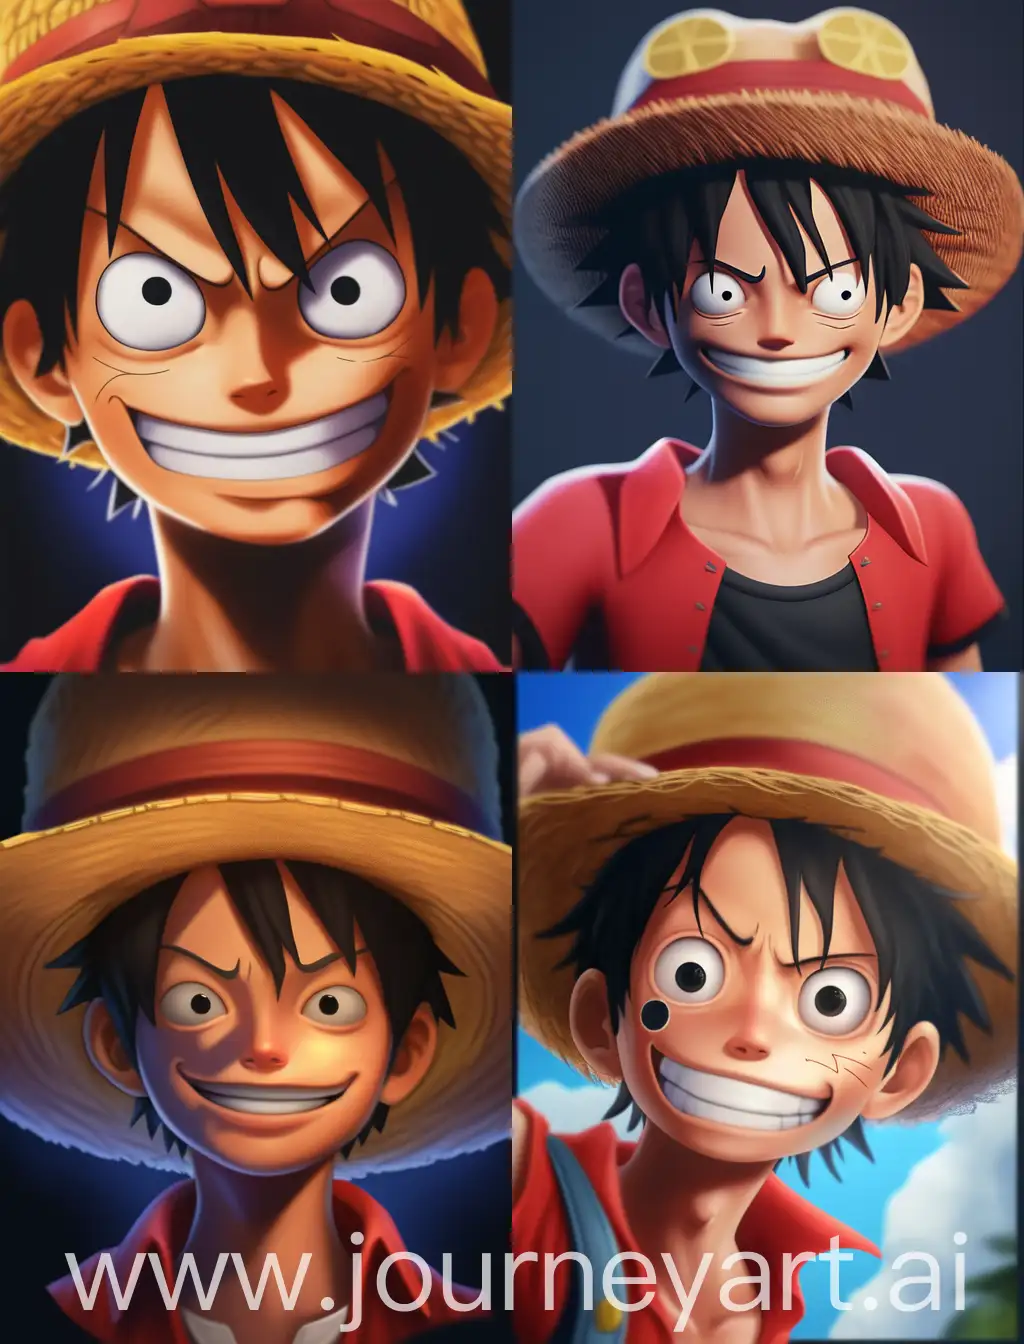 WideEyed-Smiling-Monkey-D-Luffy-from-One-Piece-Anime-in-Detailed-8K-Resolution